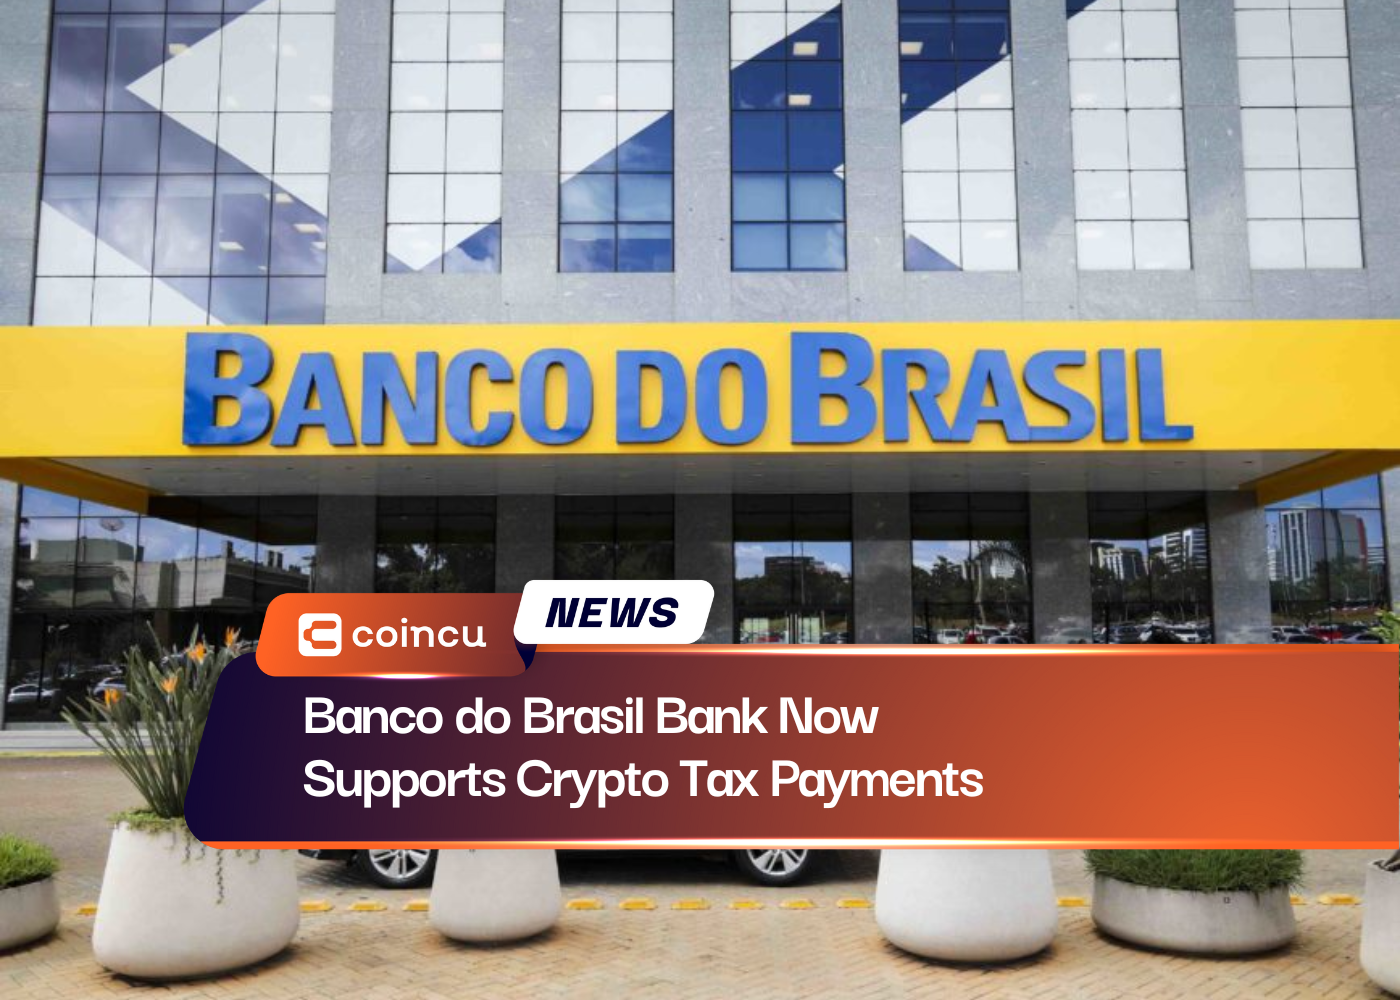 Banco do Brasil Bank Now Supports Crypto Tax Payments